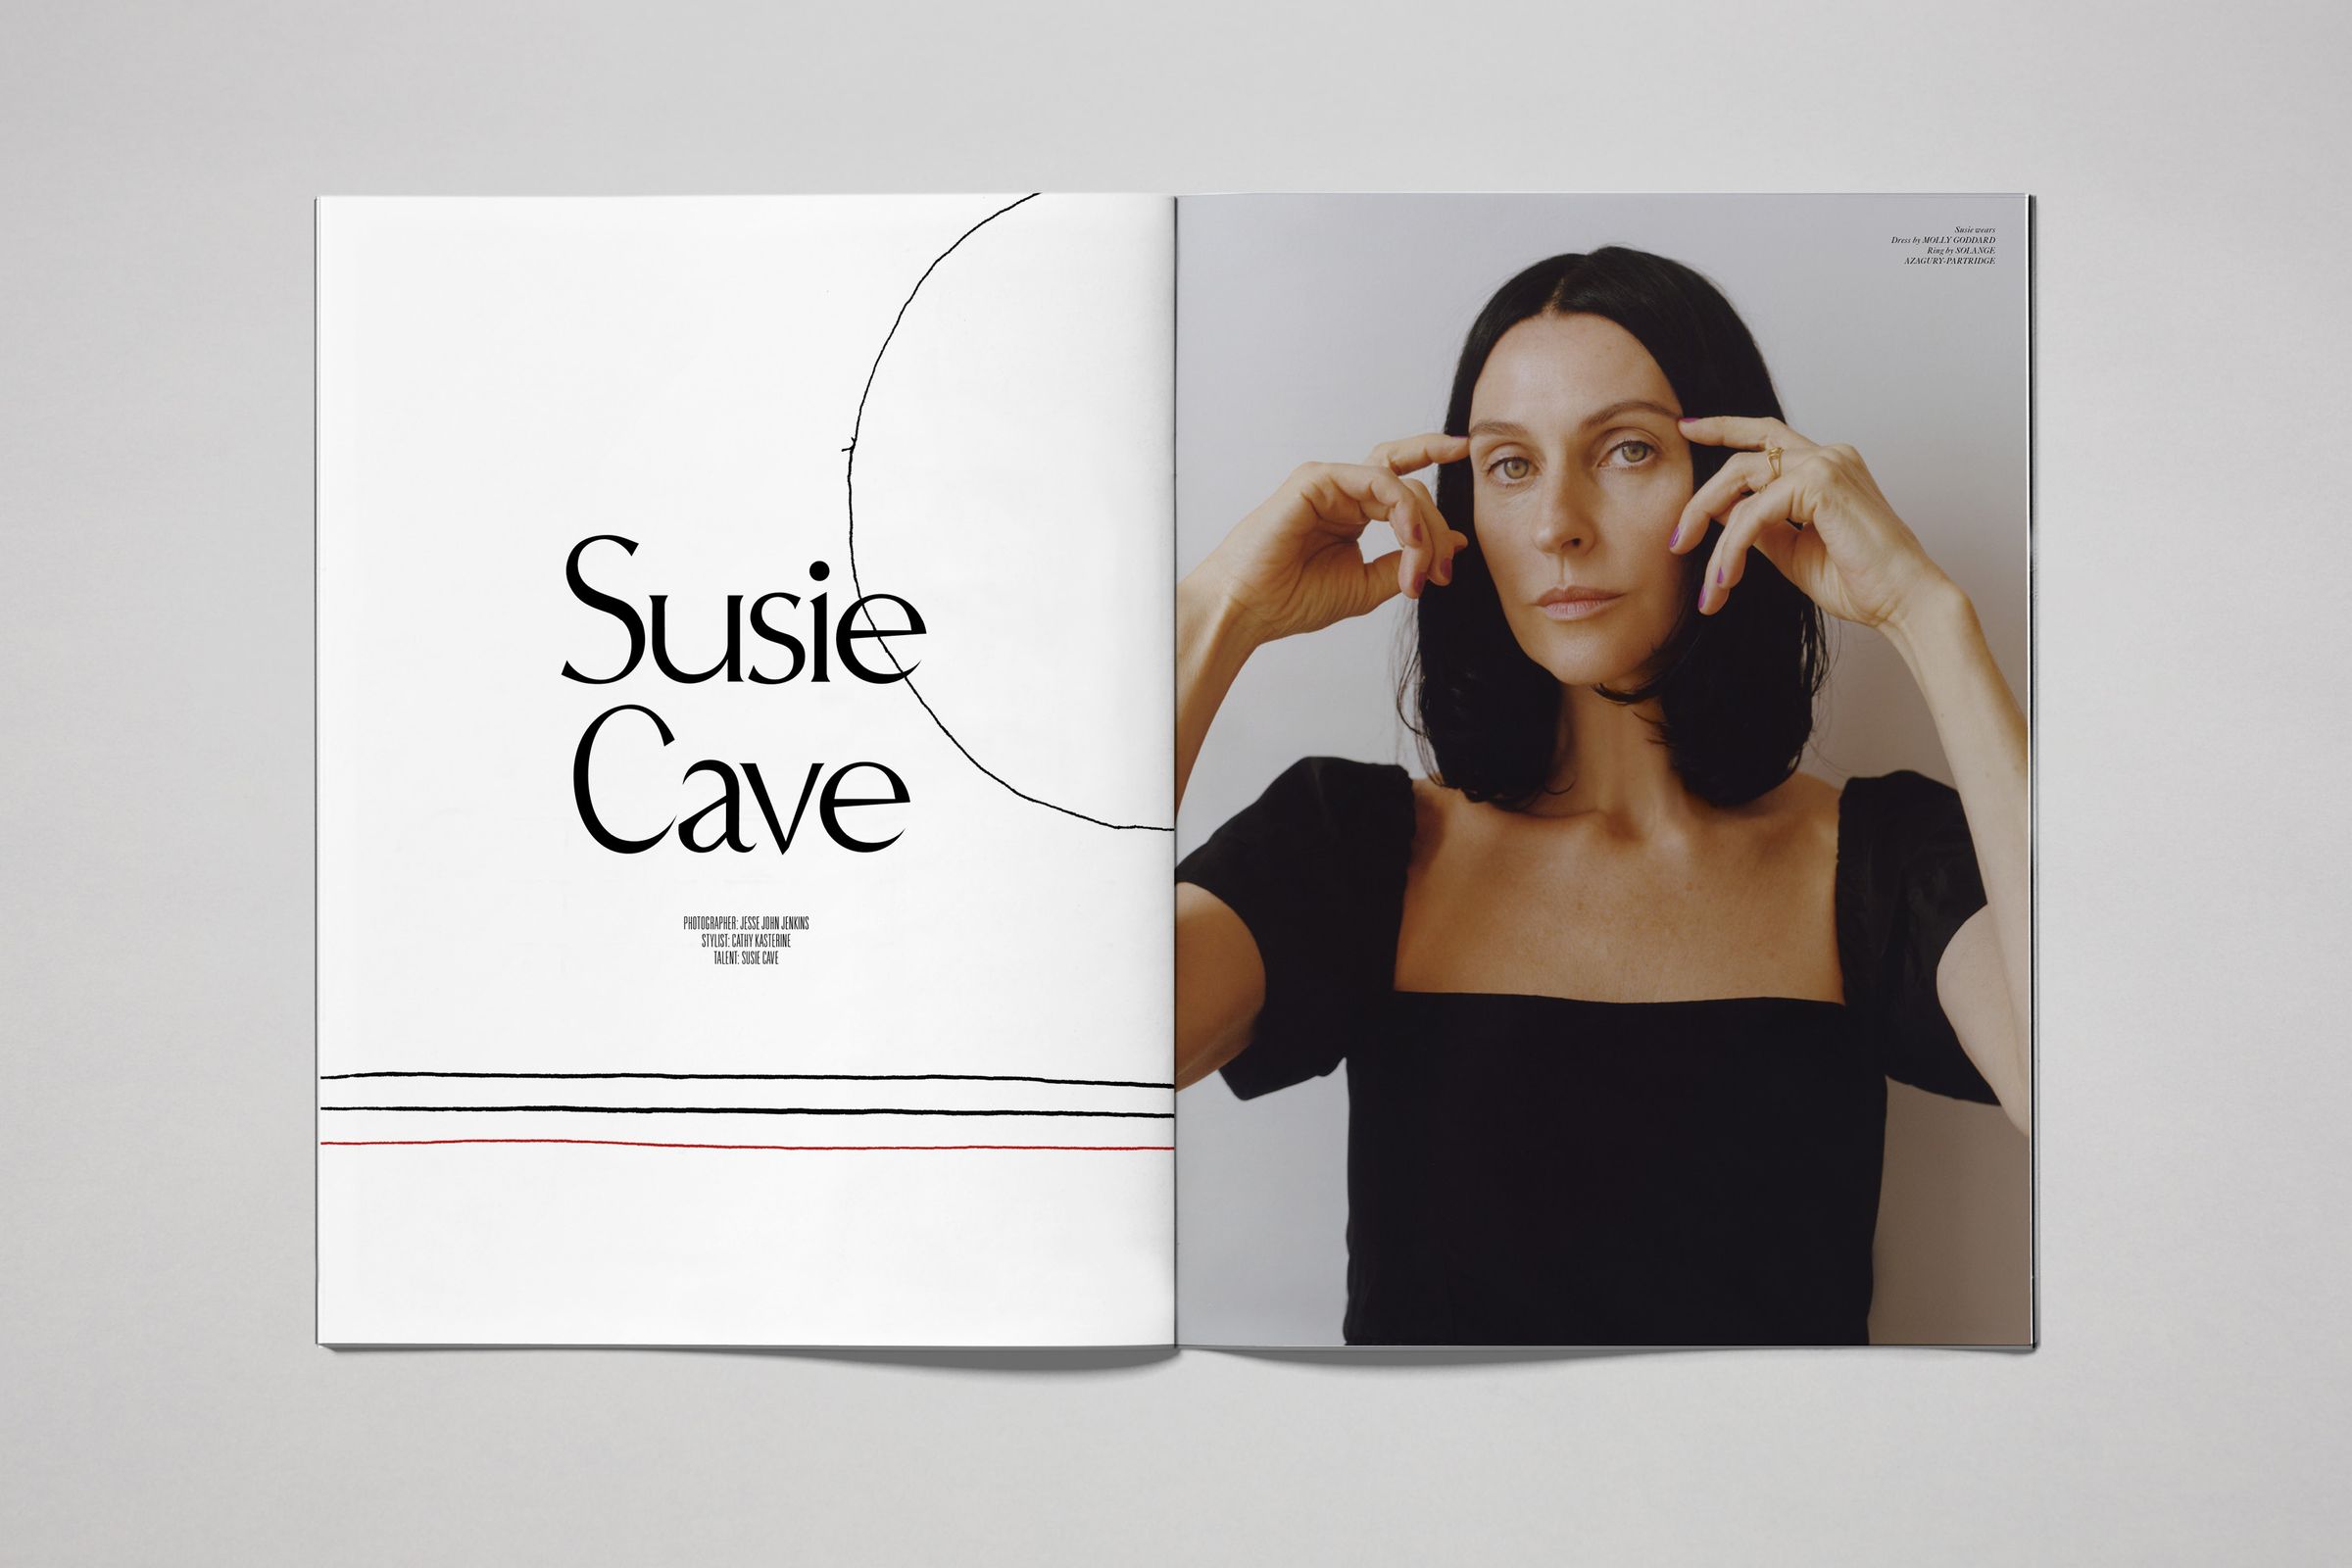 Rika Magazine issue no. 15 Susie Cave photographed by Jesse John Jenkins